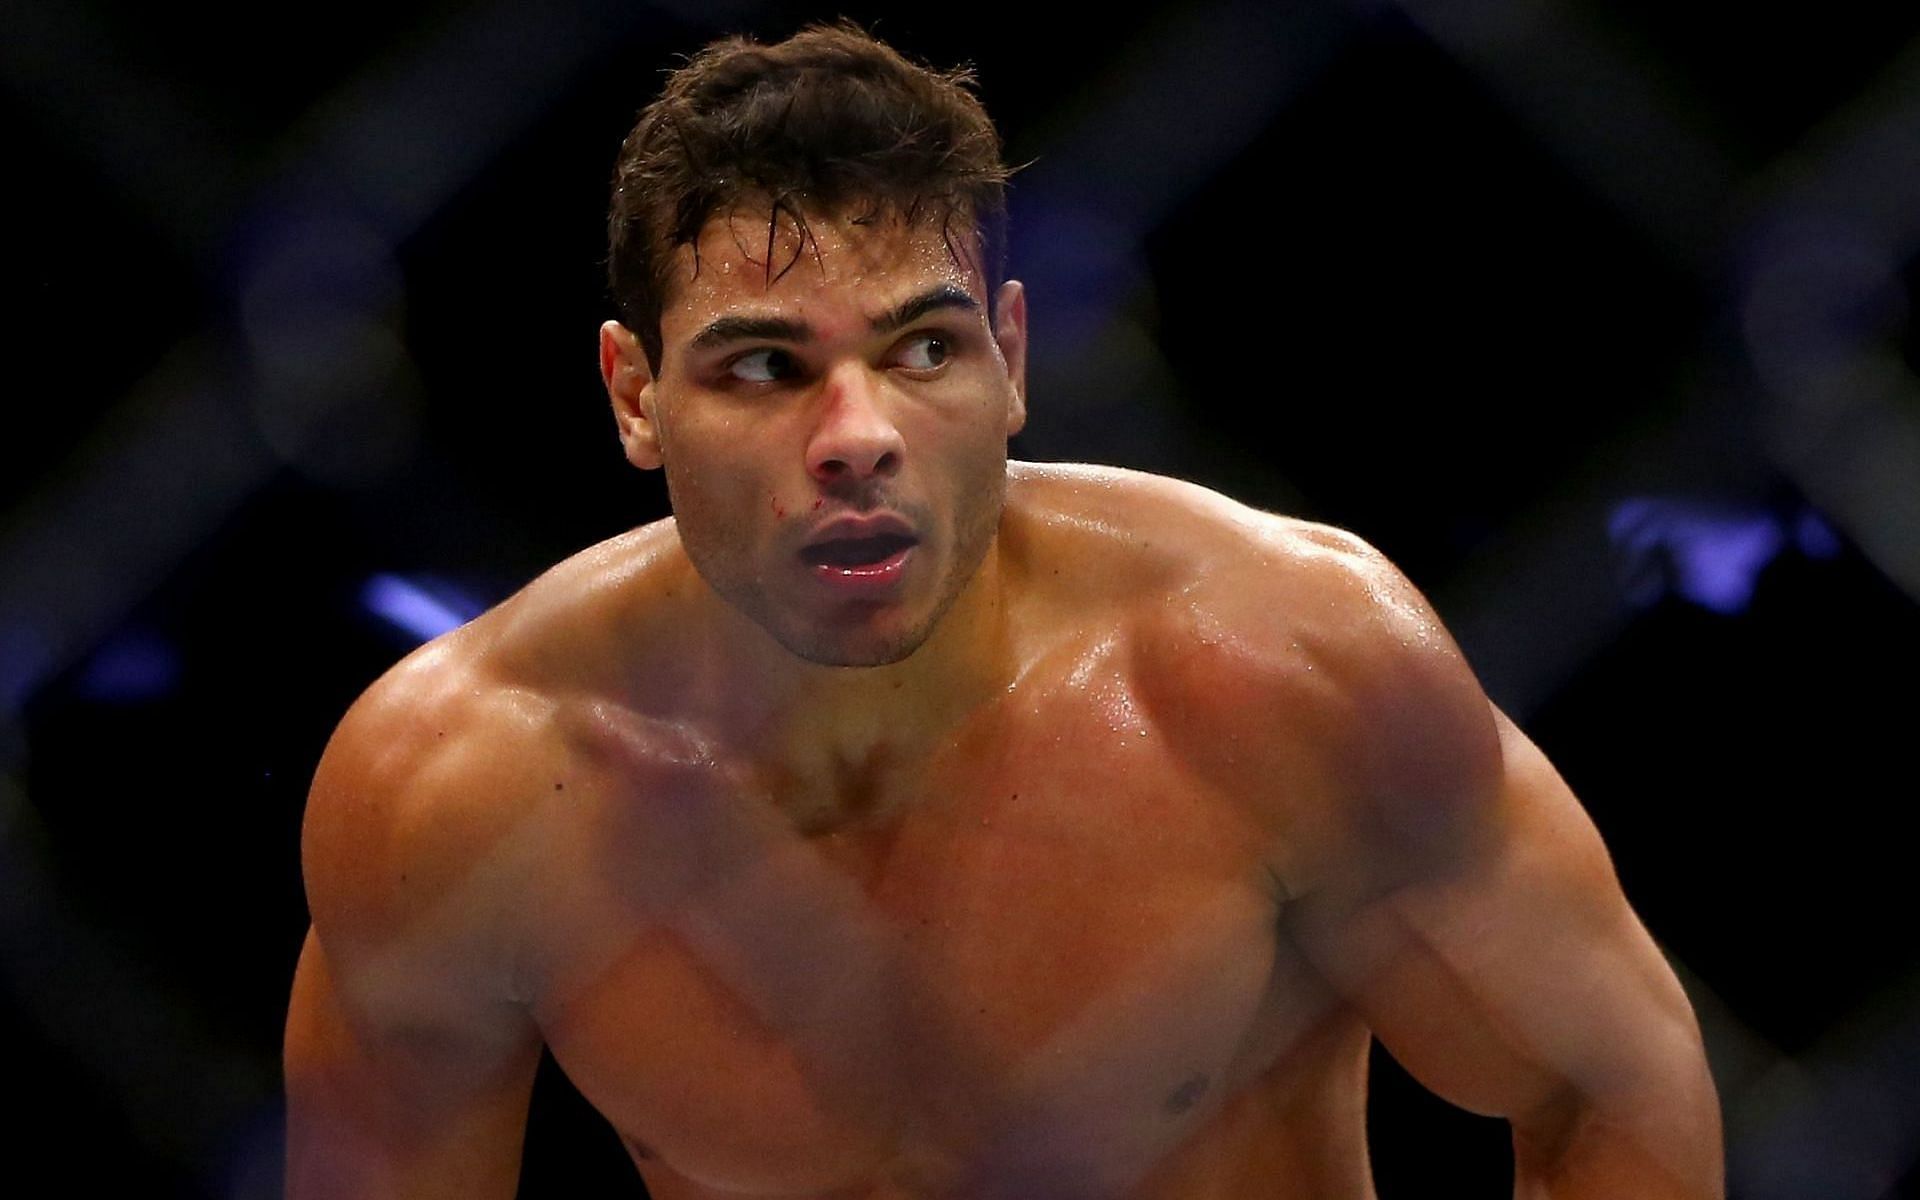 Paulo Costa has made some bizarre claims on social media